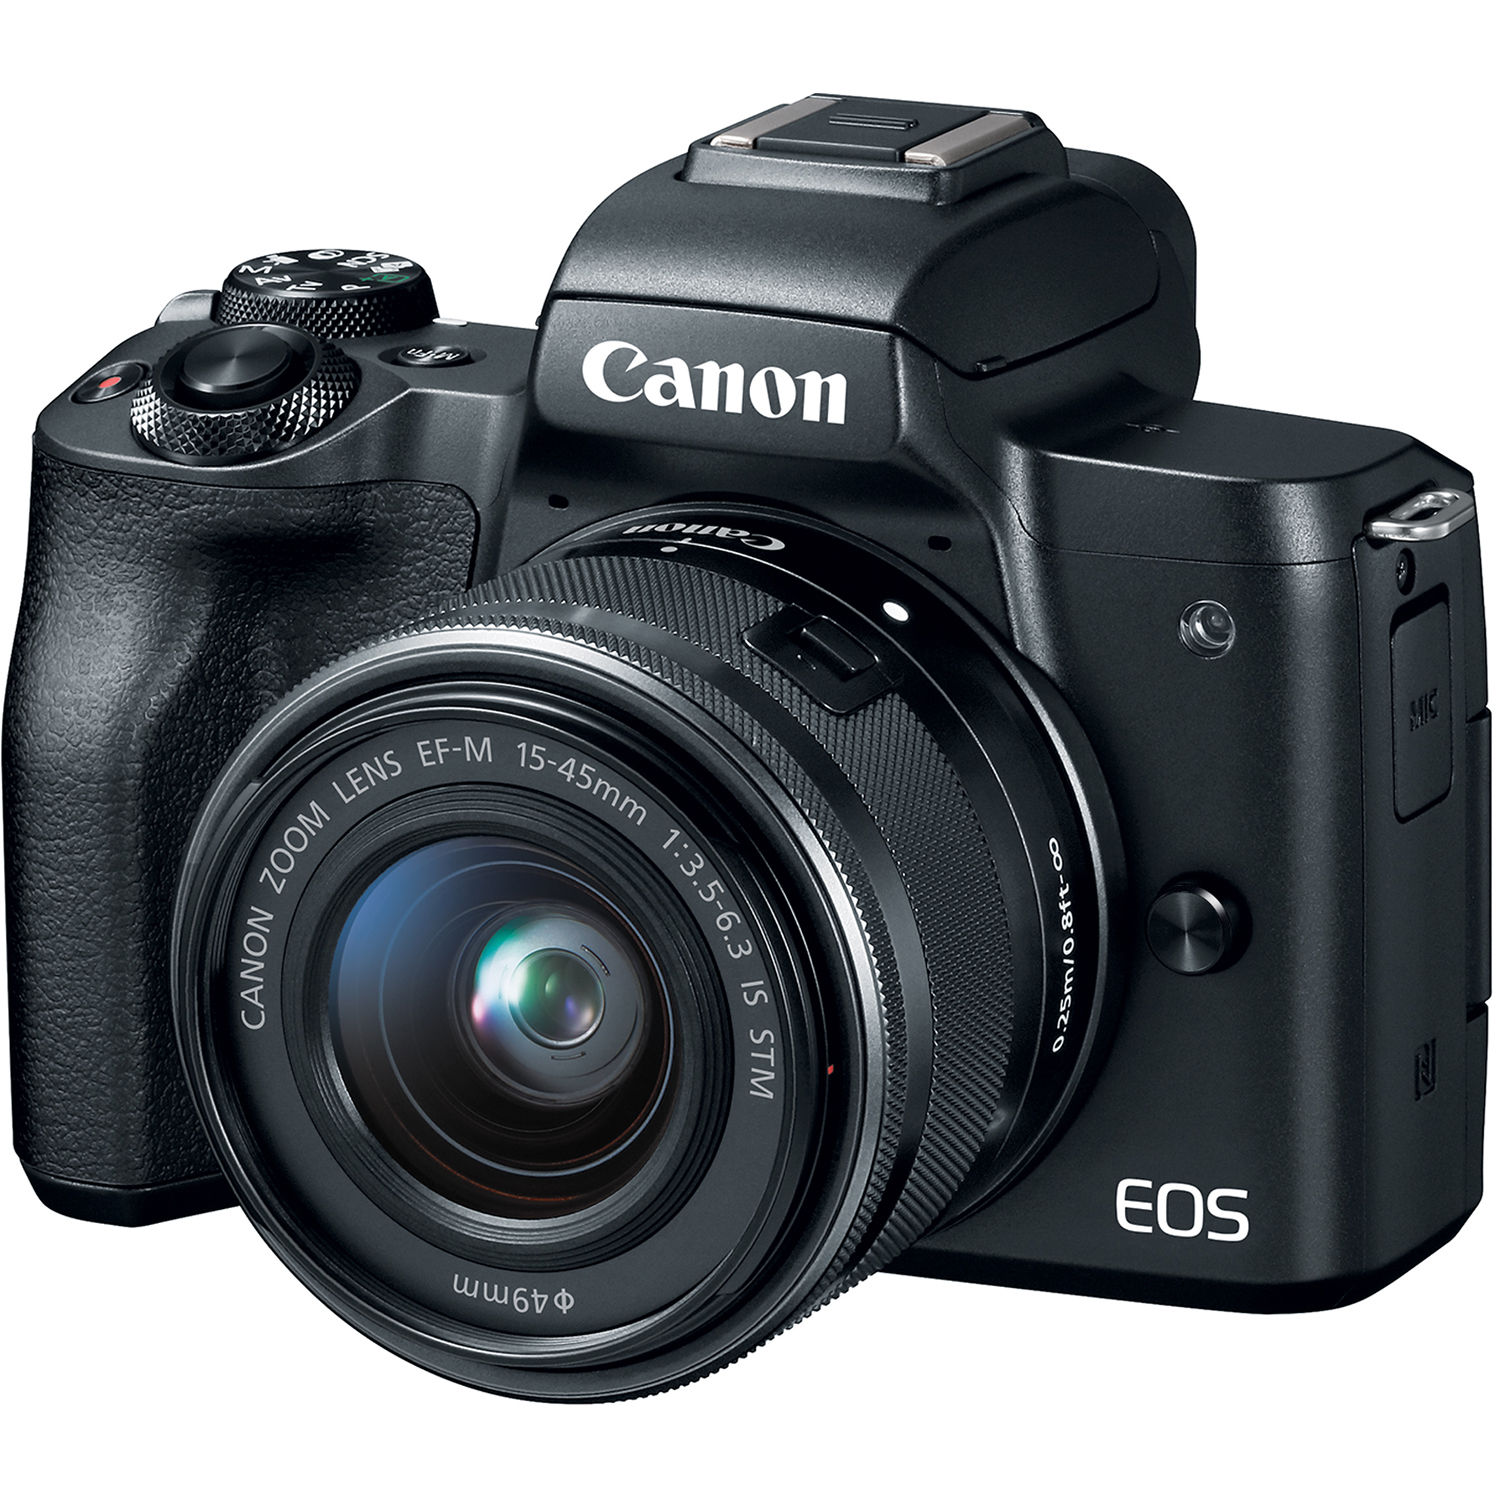 buy Canon M50 at lowest price, reviews, specification